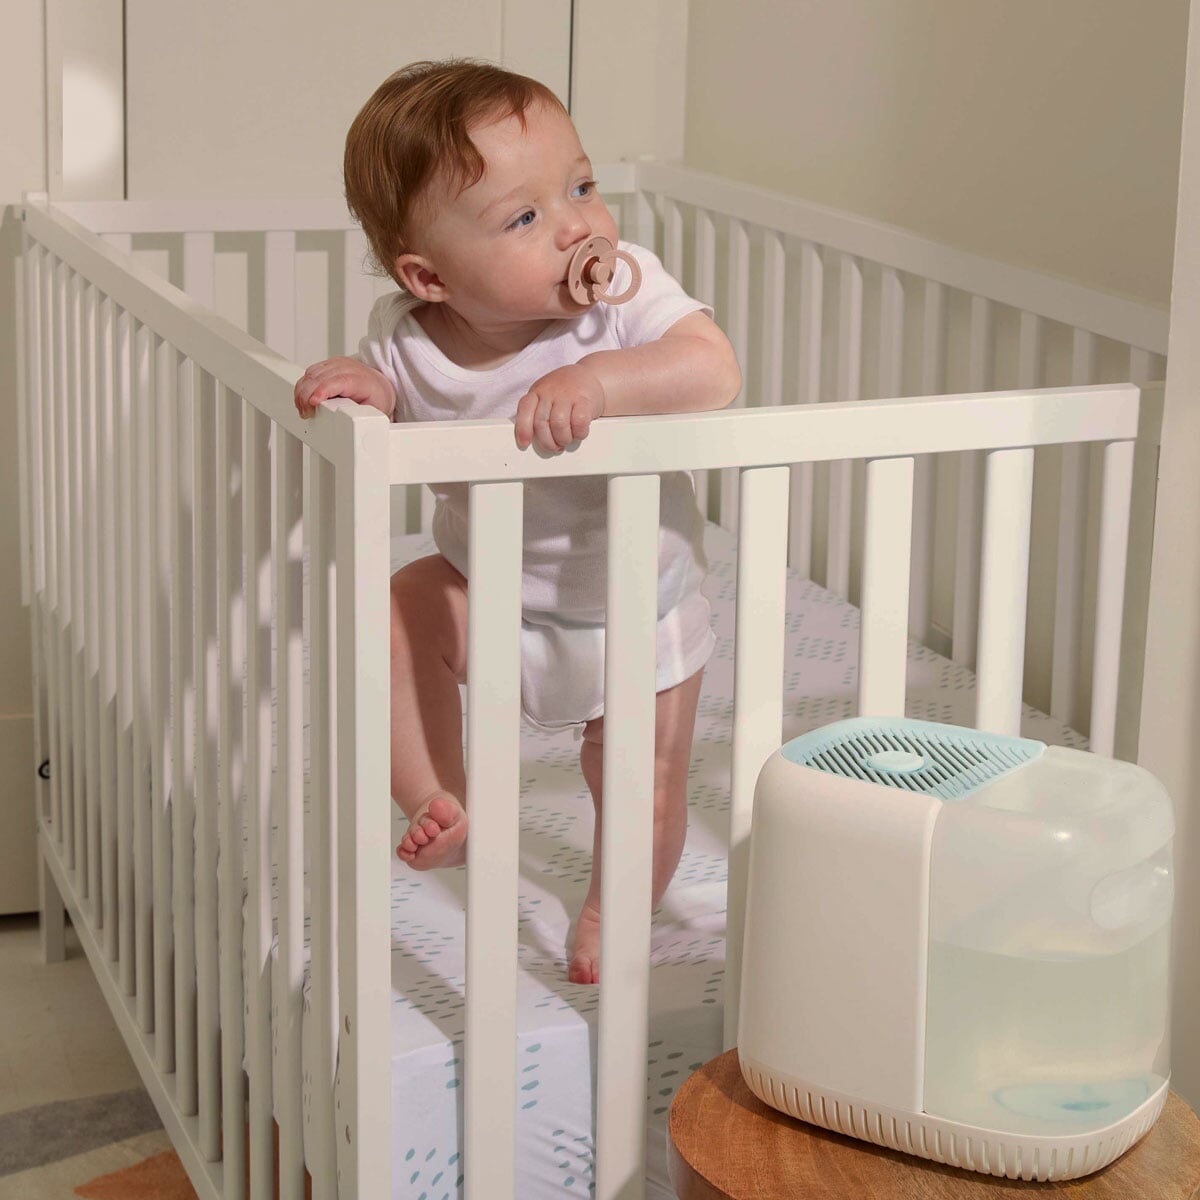 Nursery Humidifier | Lifestyle, Baby in a crib next to a blue Nursery Humidifier